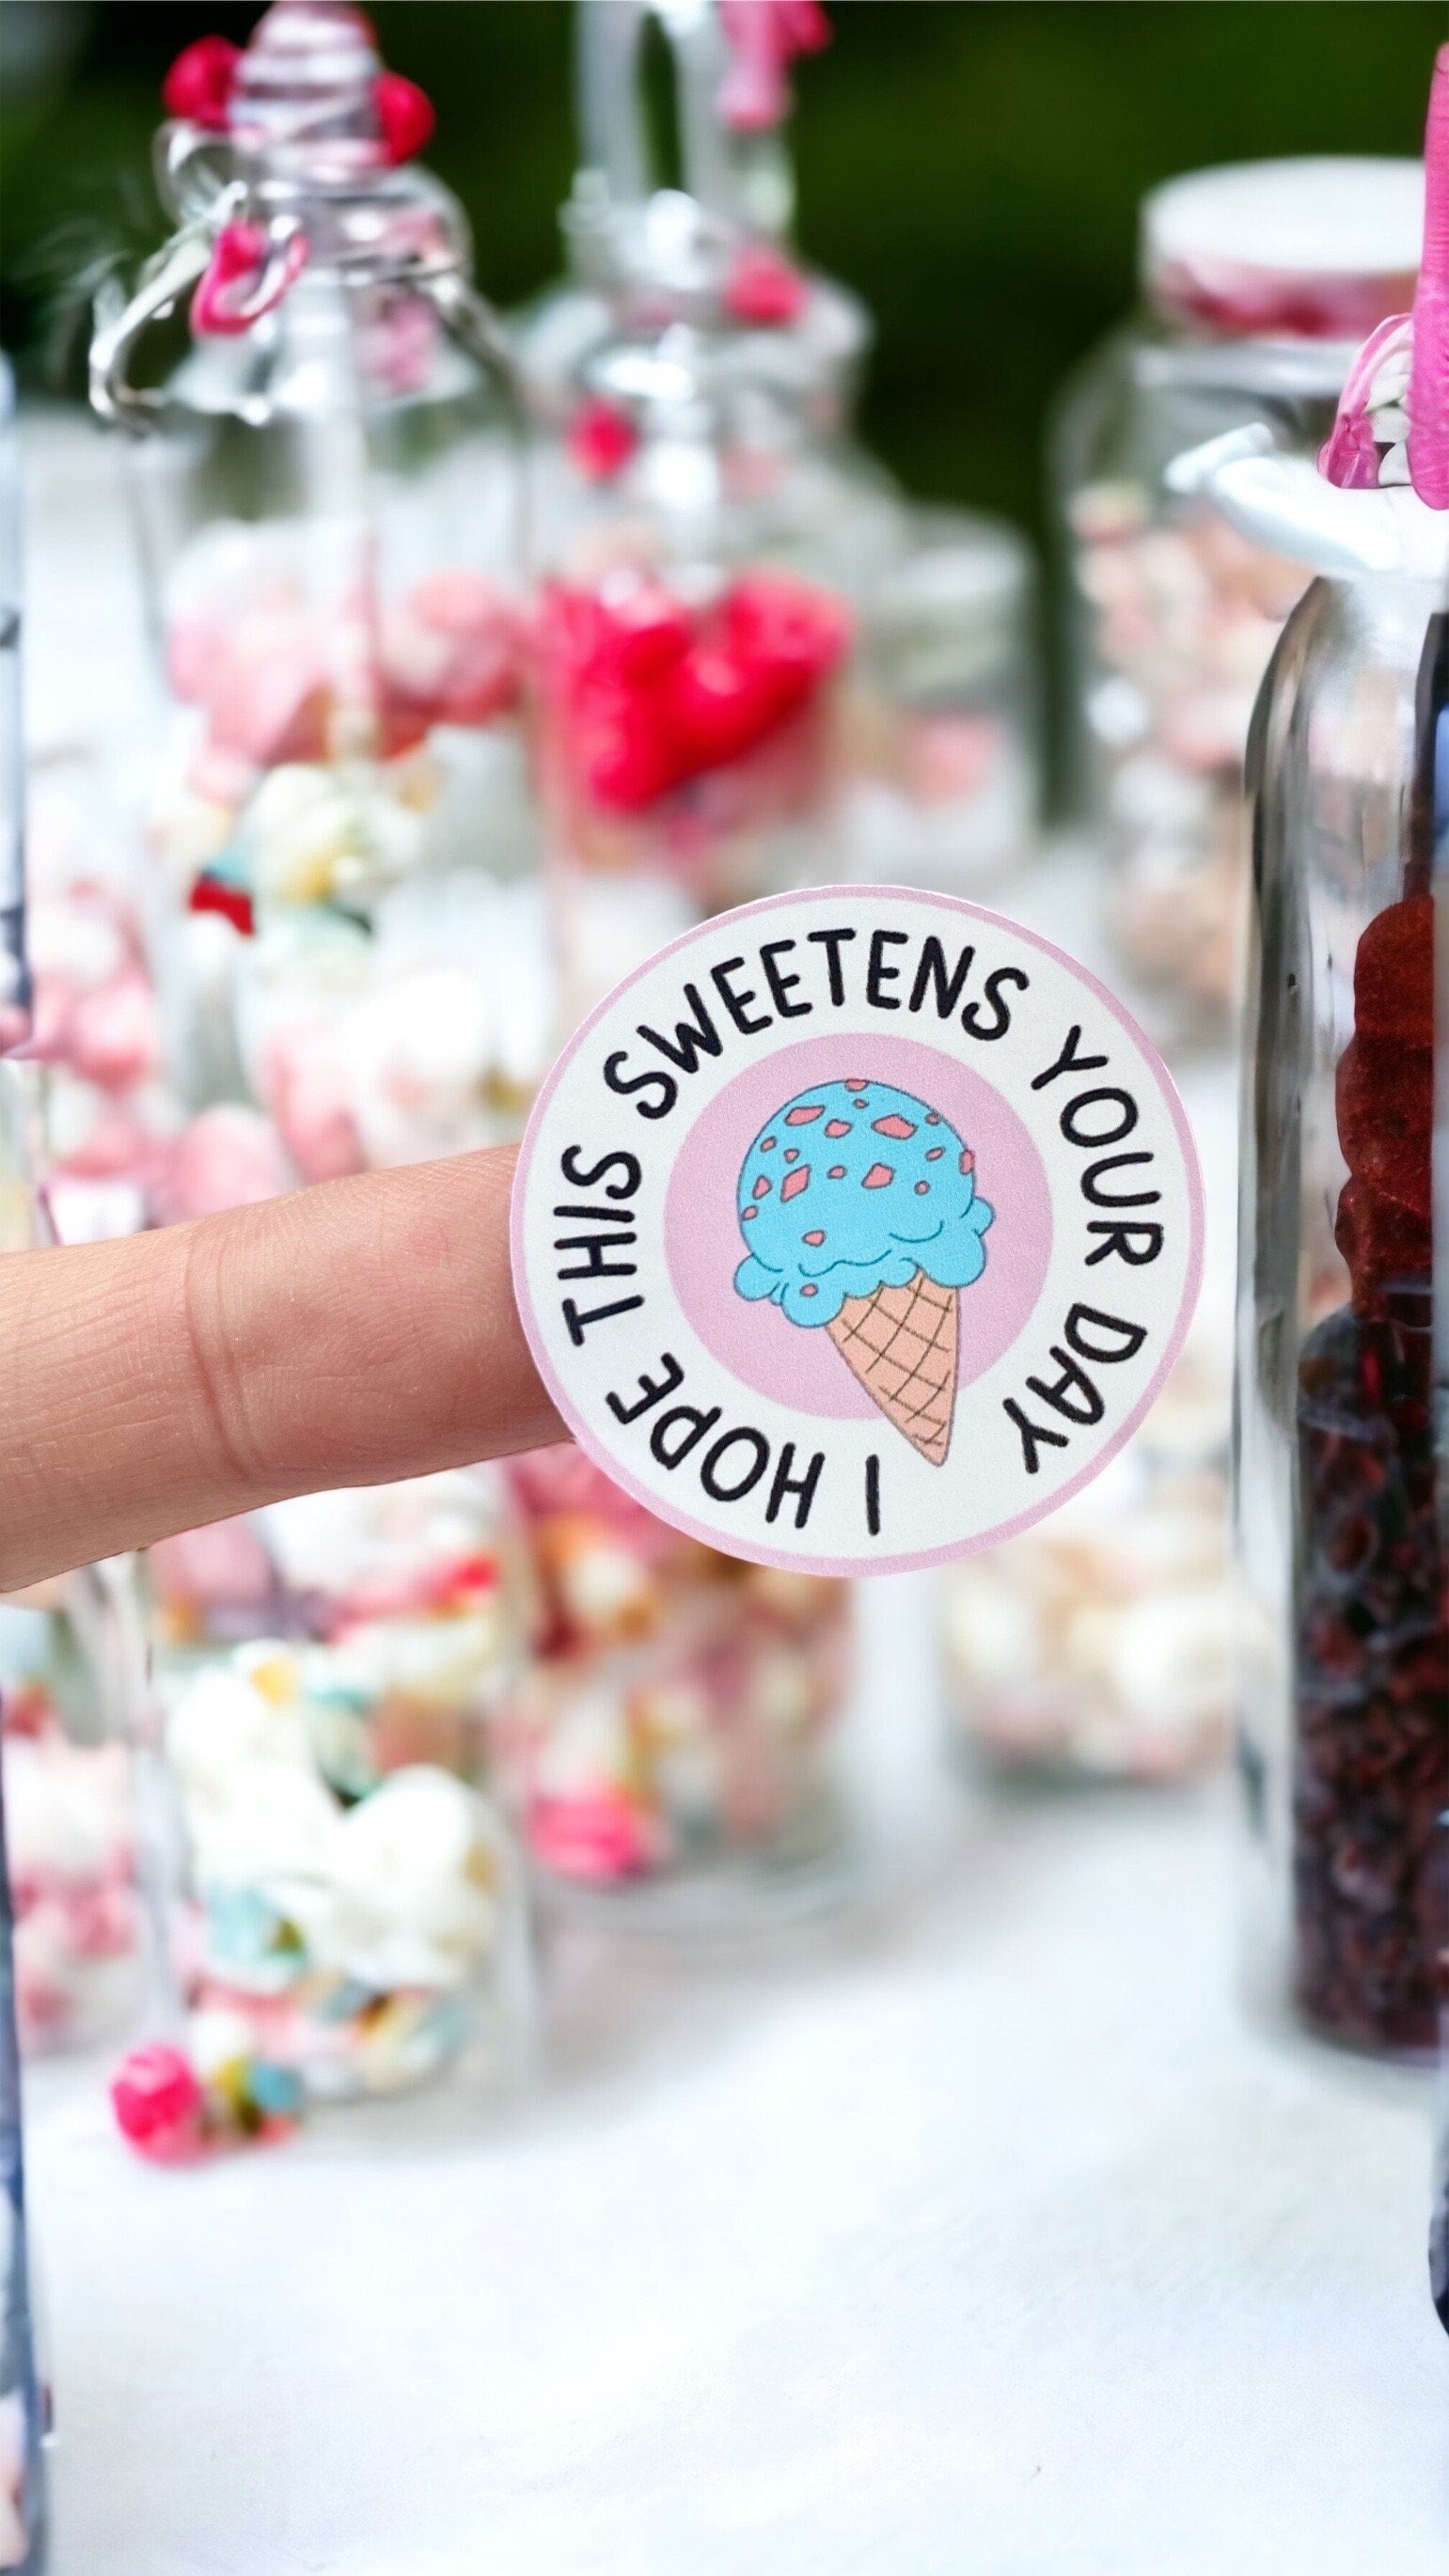 I hope this sweetens your day business stickers | order packaging | icecream sticker